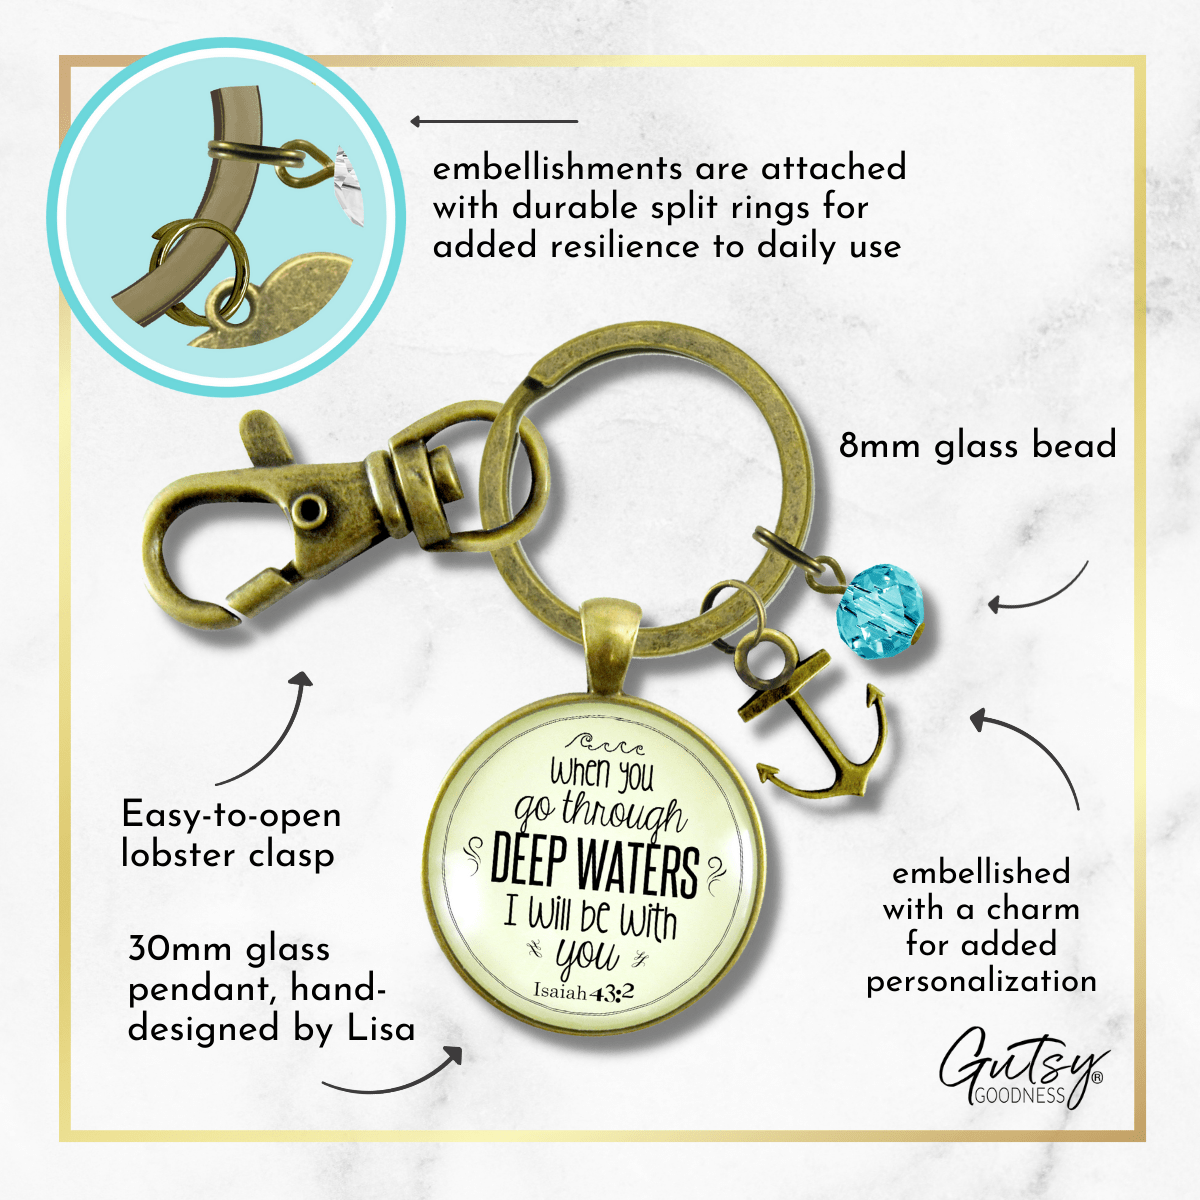 Anchor Keychain When You Go Through Deep Waters Faith Charm Jewelry - Gutsy Goodness Handmade Jewelry;Anchor Keychain When You Go Through Deep Waters Faith Charm Jewelry - Gutsy Goodness Handmade Jewelry Gifts